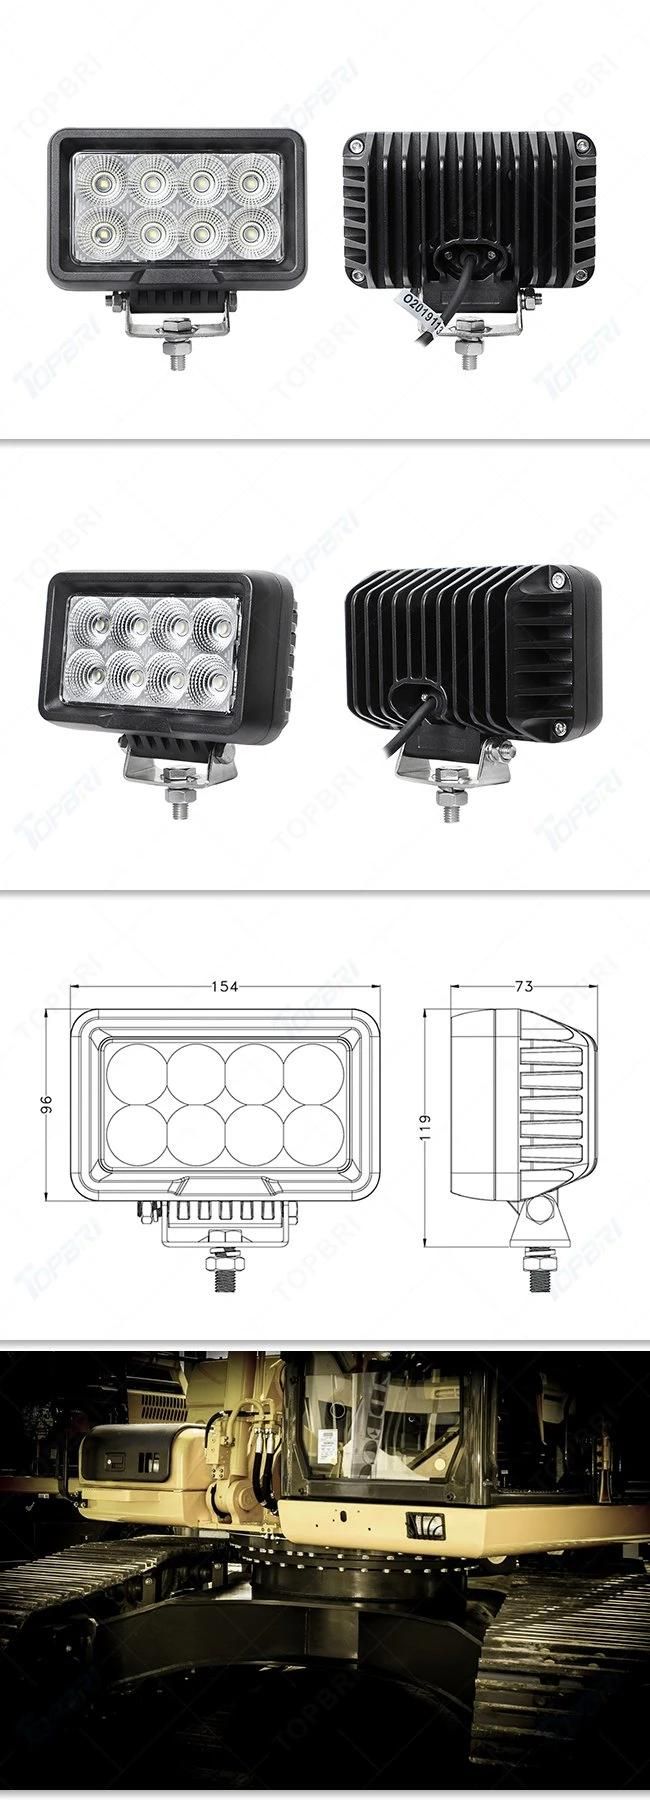 6inch 80W 12V LED Emergency Vehicle Tower Truck Offroad Car Work Lights with Swivel Bracket